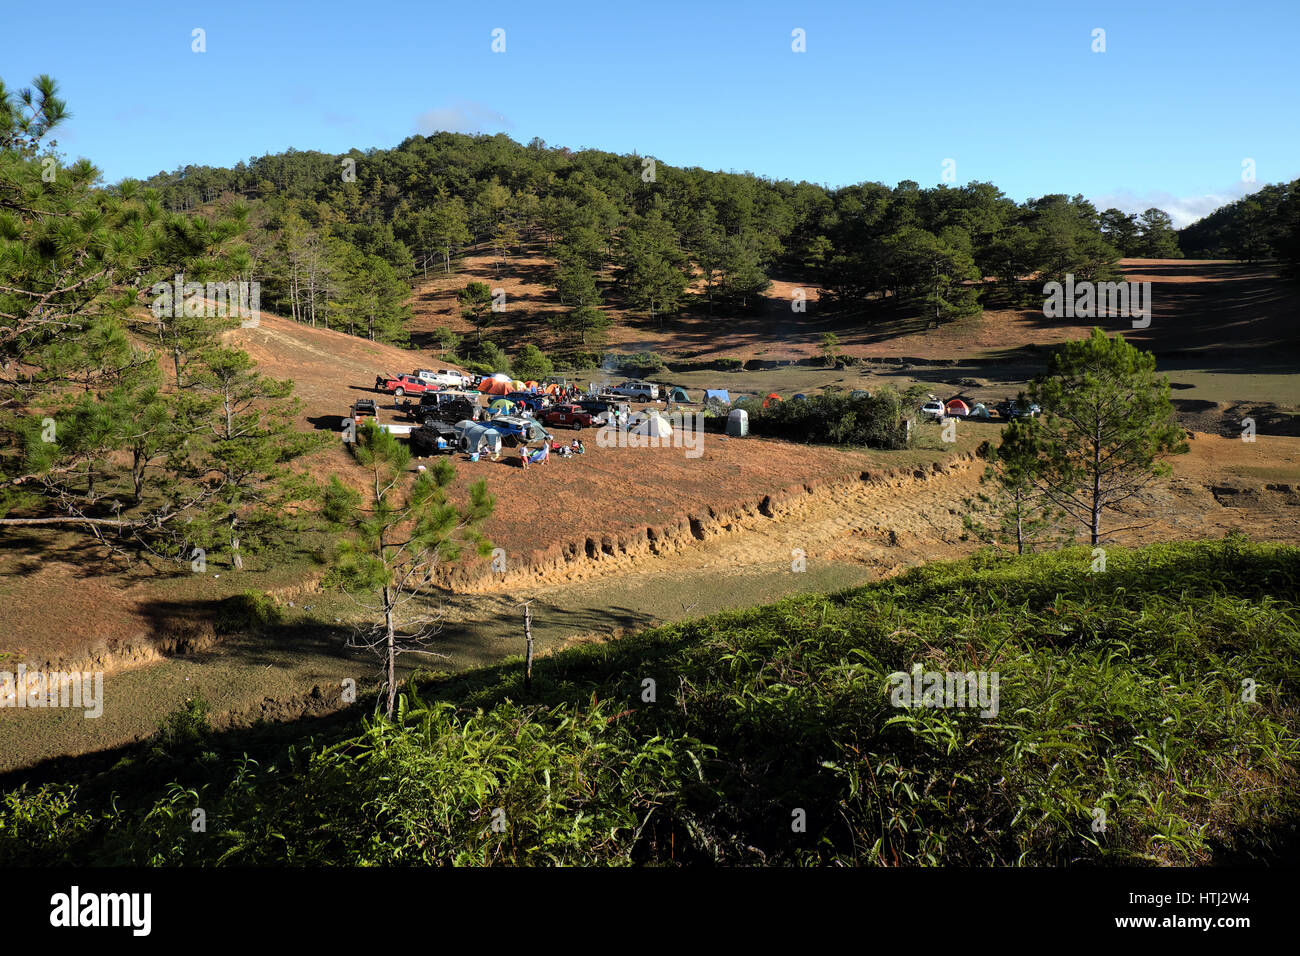 DA LAT, VIET NAM- JAN 2: Group of person  in family vacation in spring, people with 4x4 terrain car camp at pine forest, exciting experience in eco tr Stock Photo